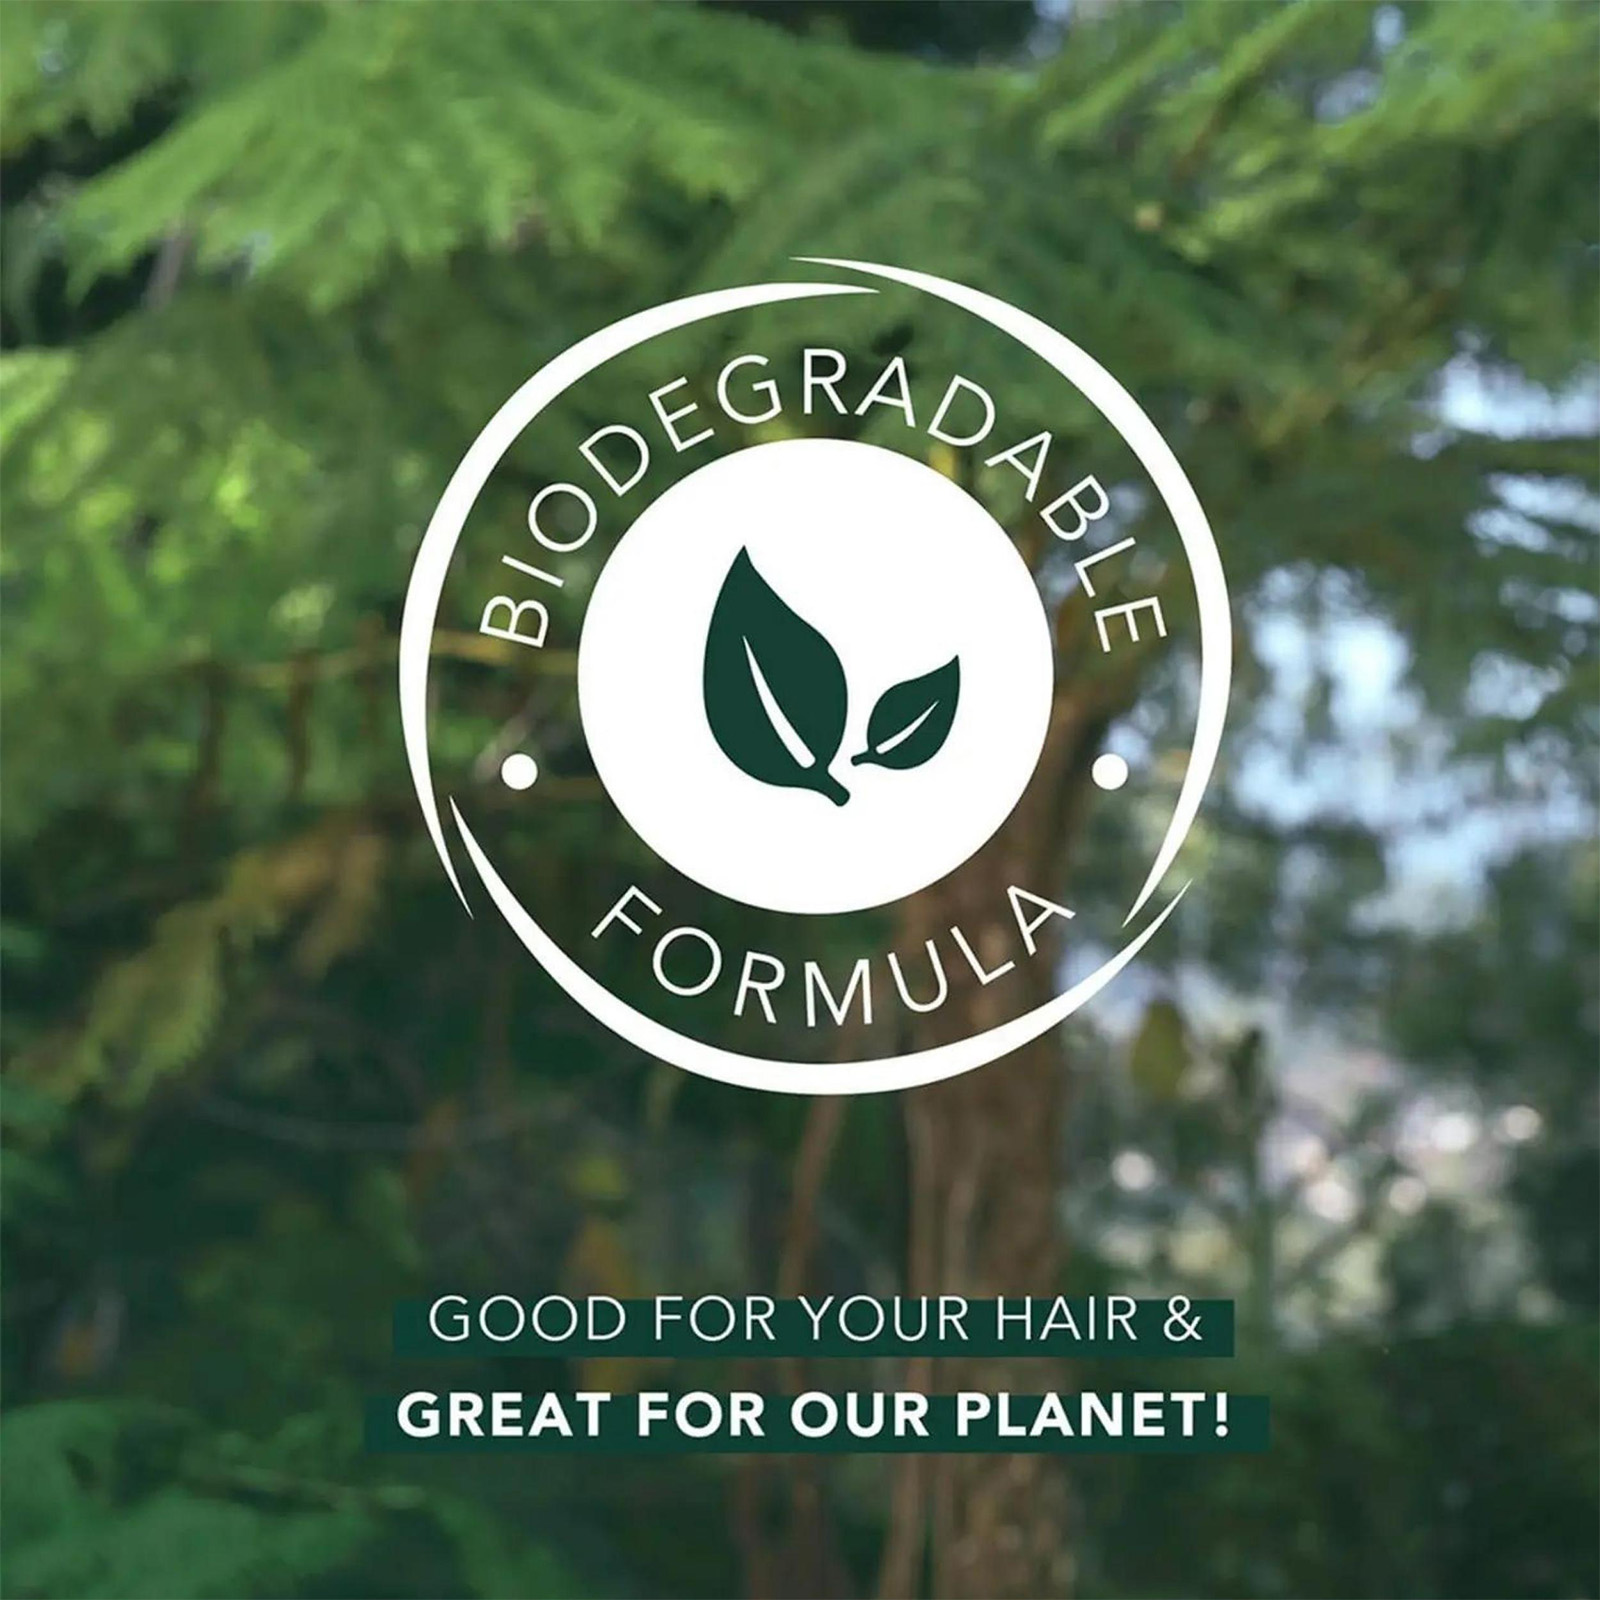 Biodegradable Formula - Good for your hair & great for our planet